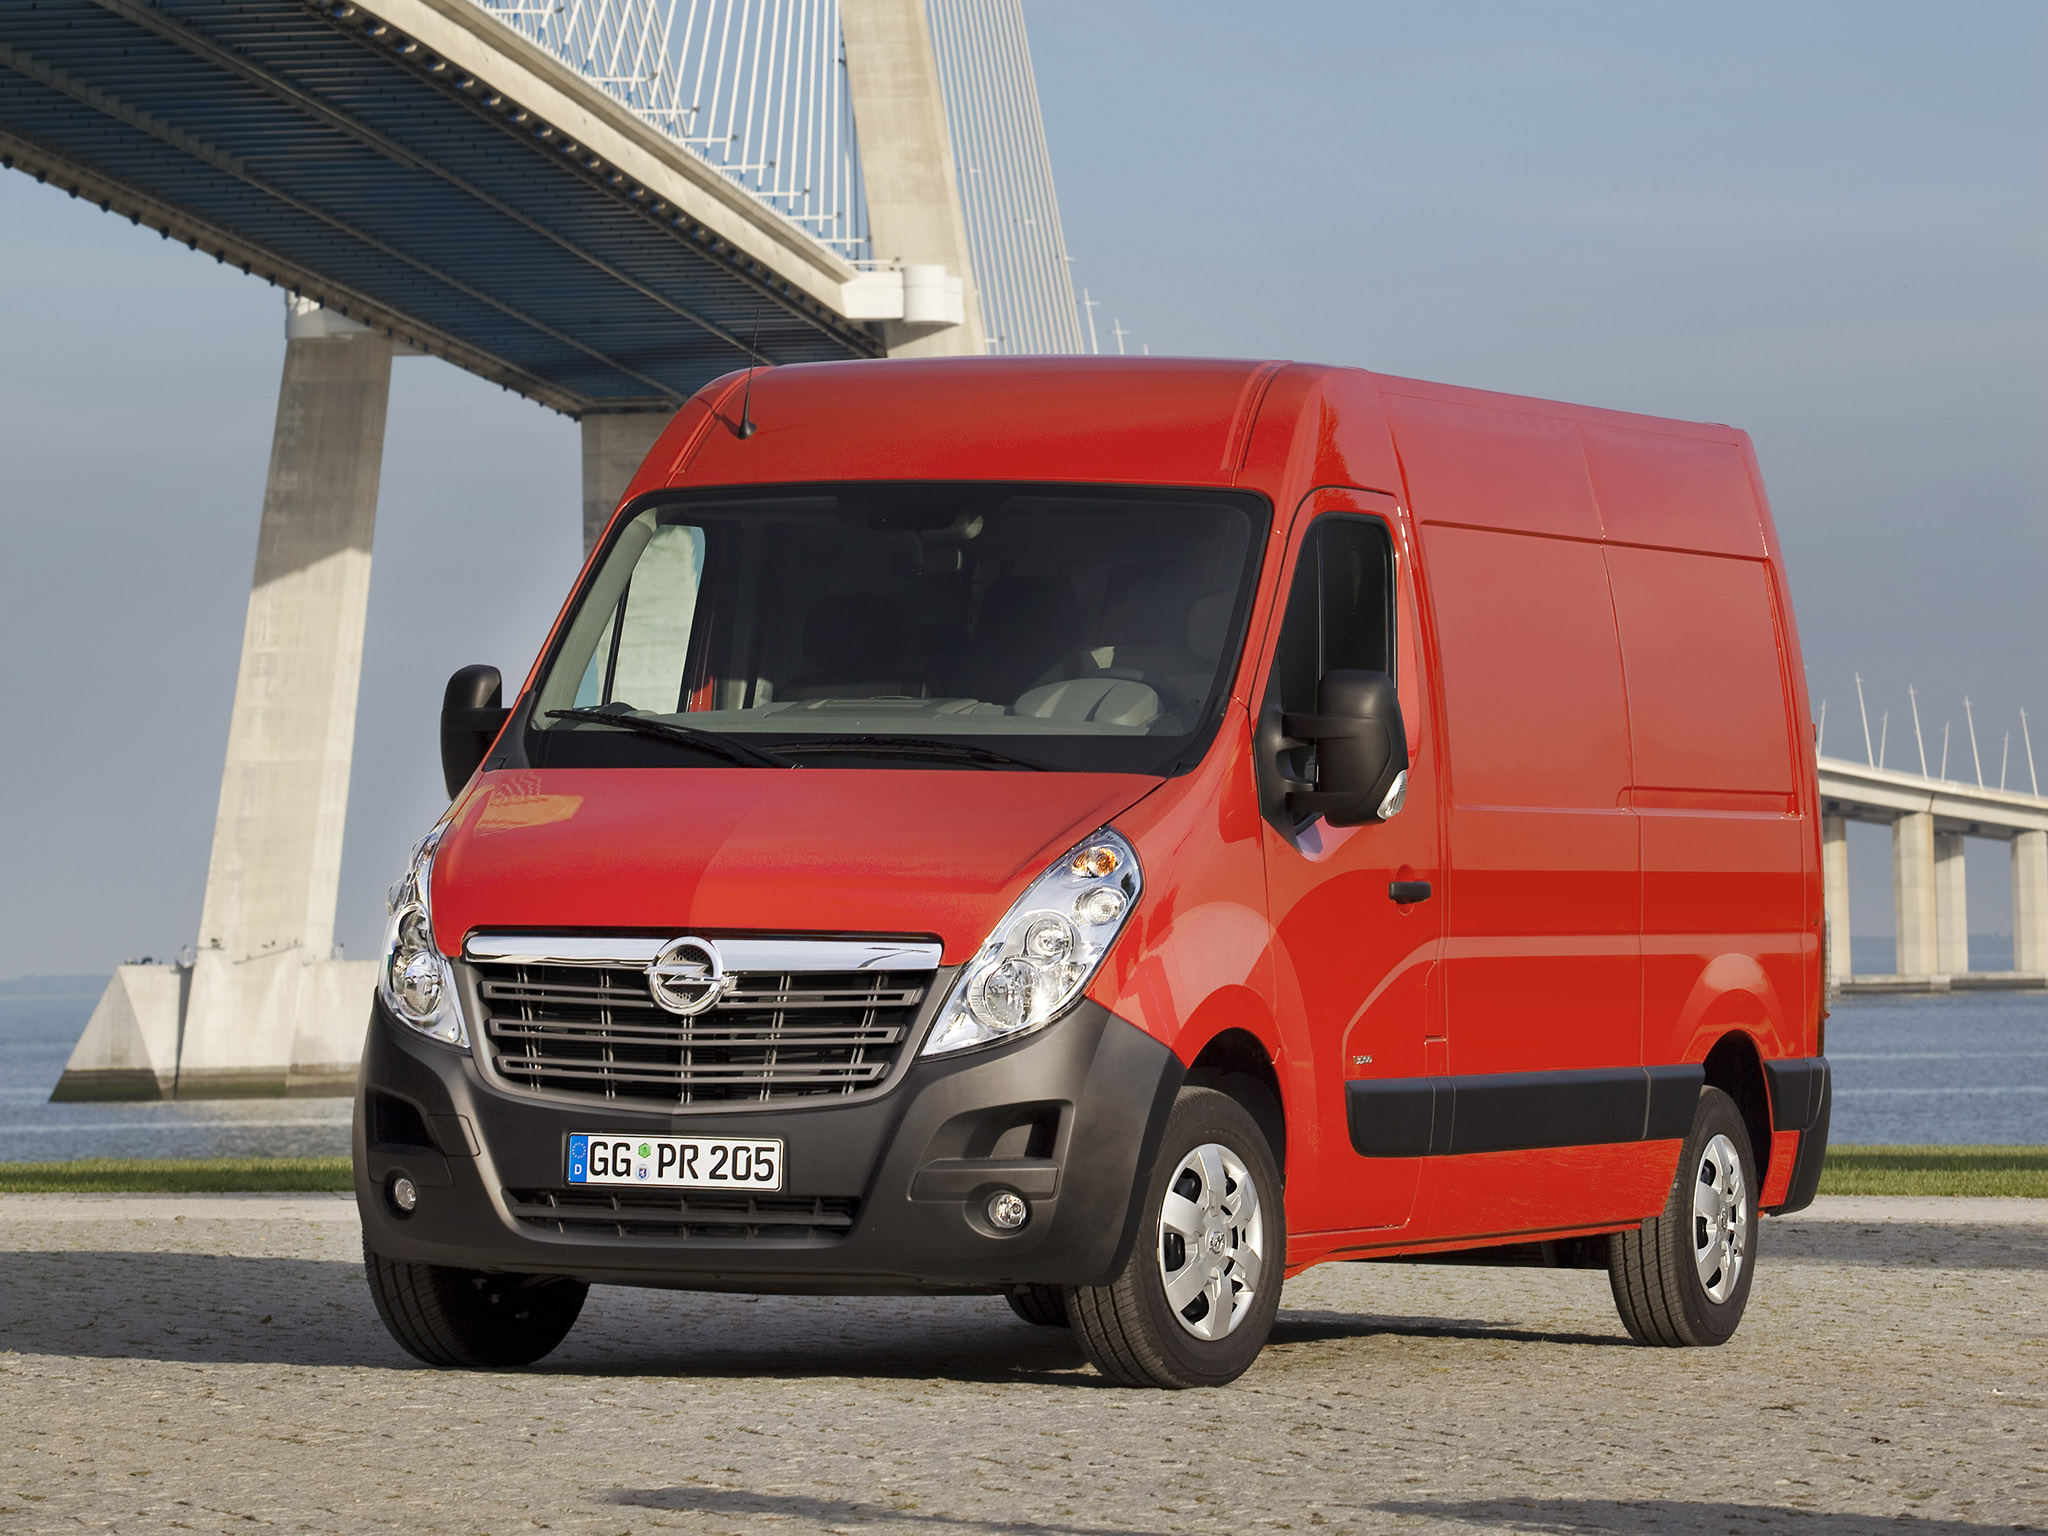 The 2010 Opel Movano is one of the finest models produced by OPEL.